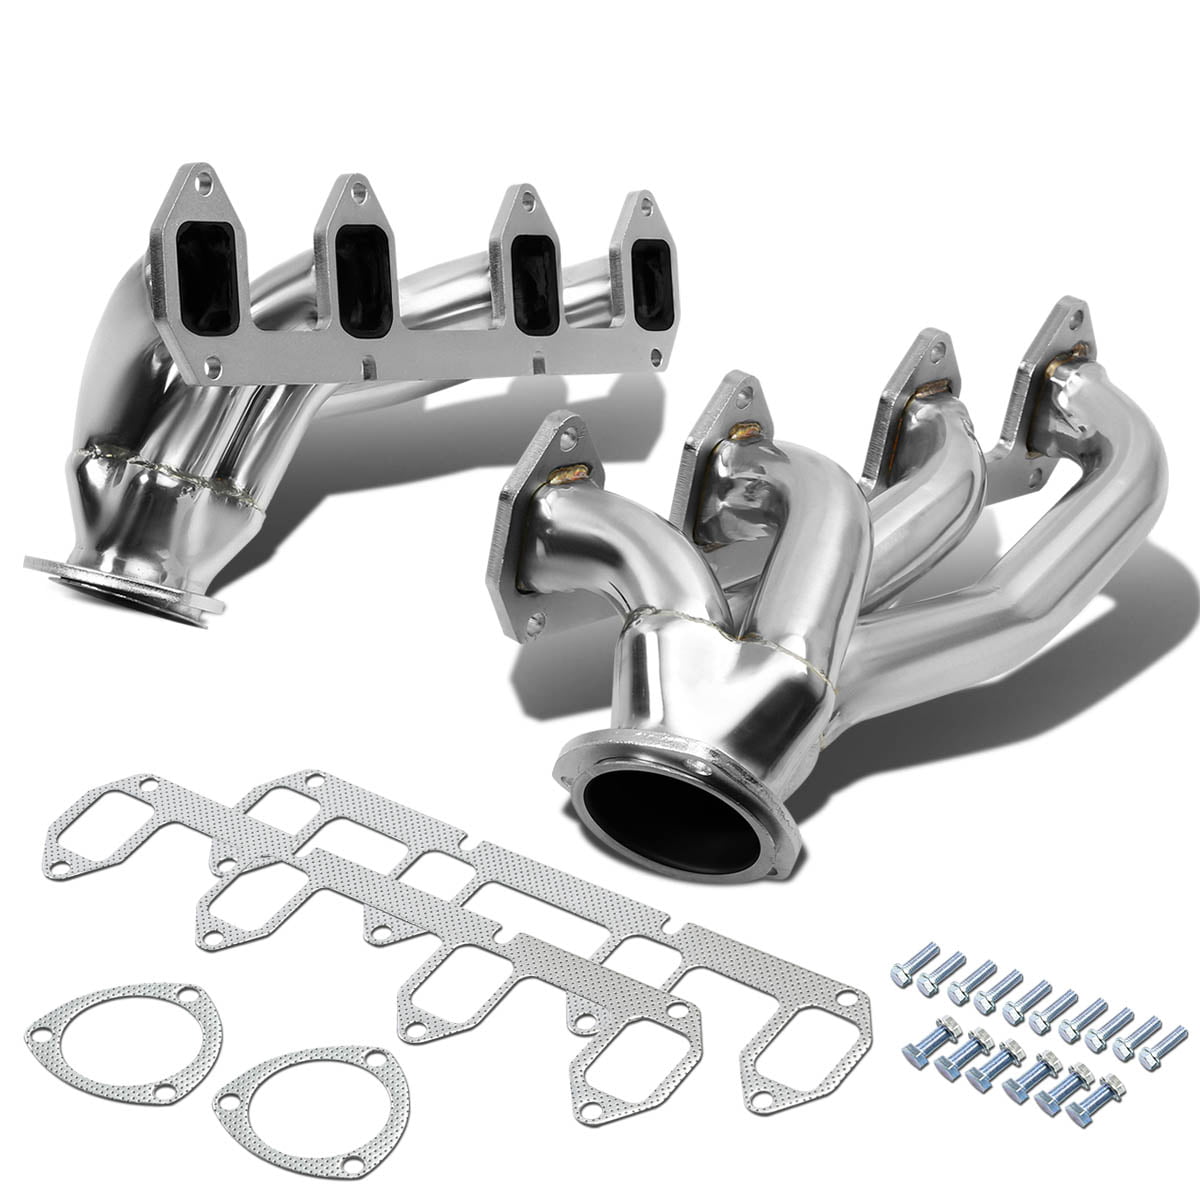 DNA Motoring HDS-FPU77-2WD-LT Pair Stainless Steel 4-1 Exhaust Manifold Header 